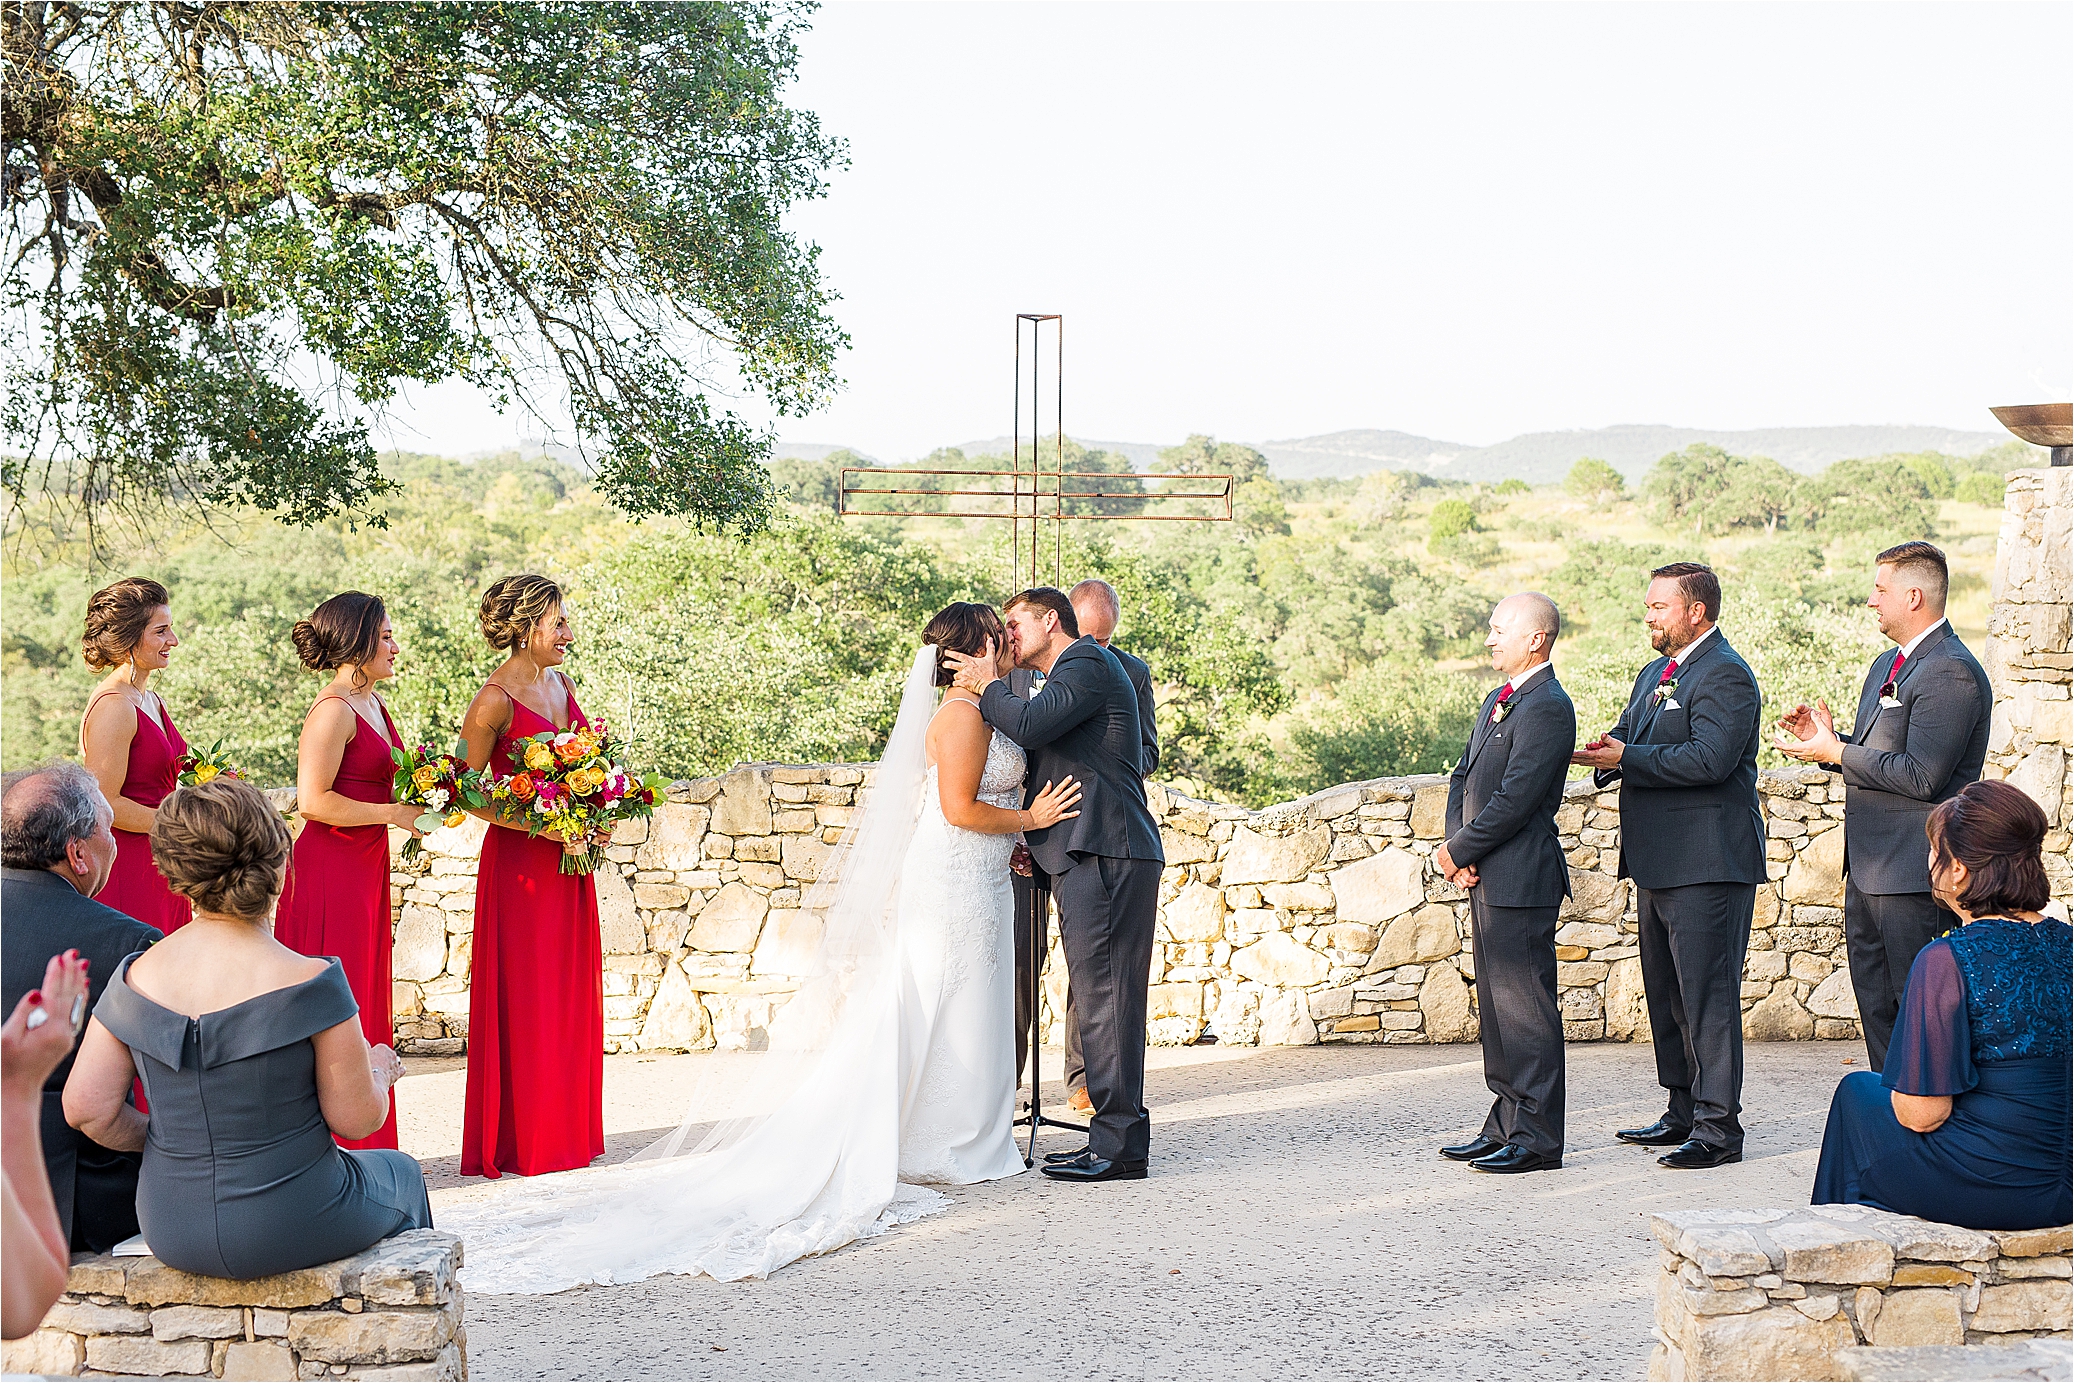 A first kiss at Paniolo Ranch in Boerne, Texas